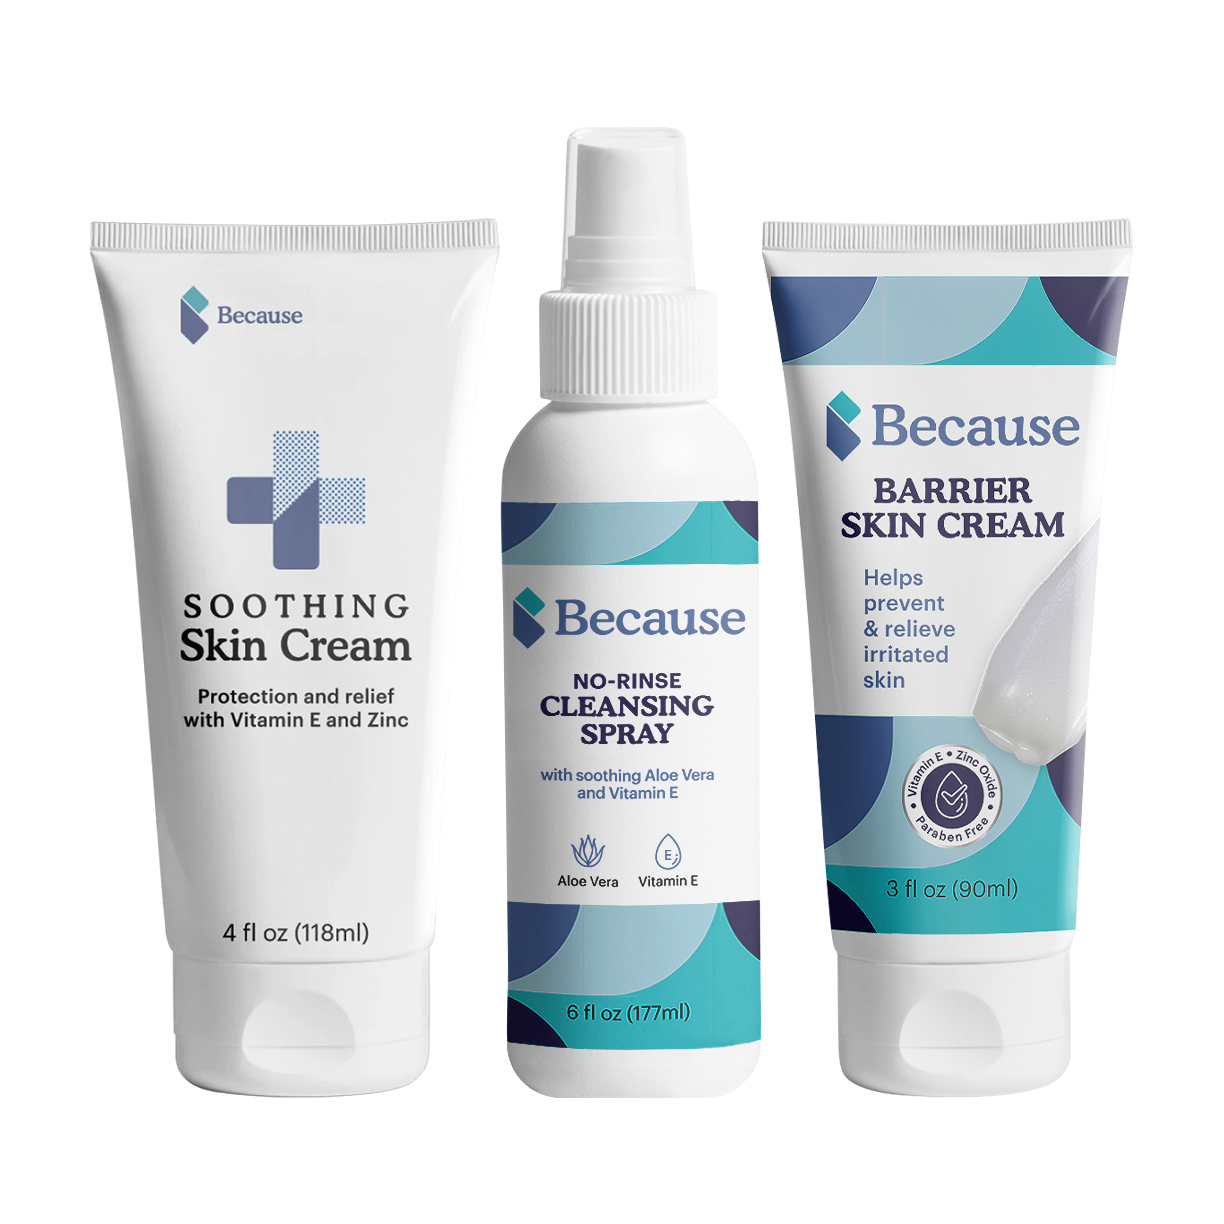 Because Market Soothing Cream, No-rinse spray, and barrier cream sample products. White background.